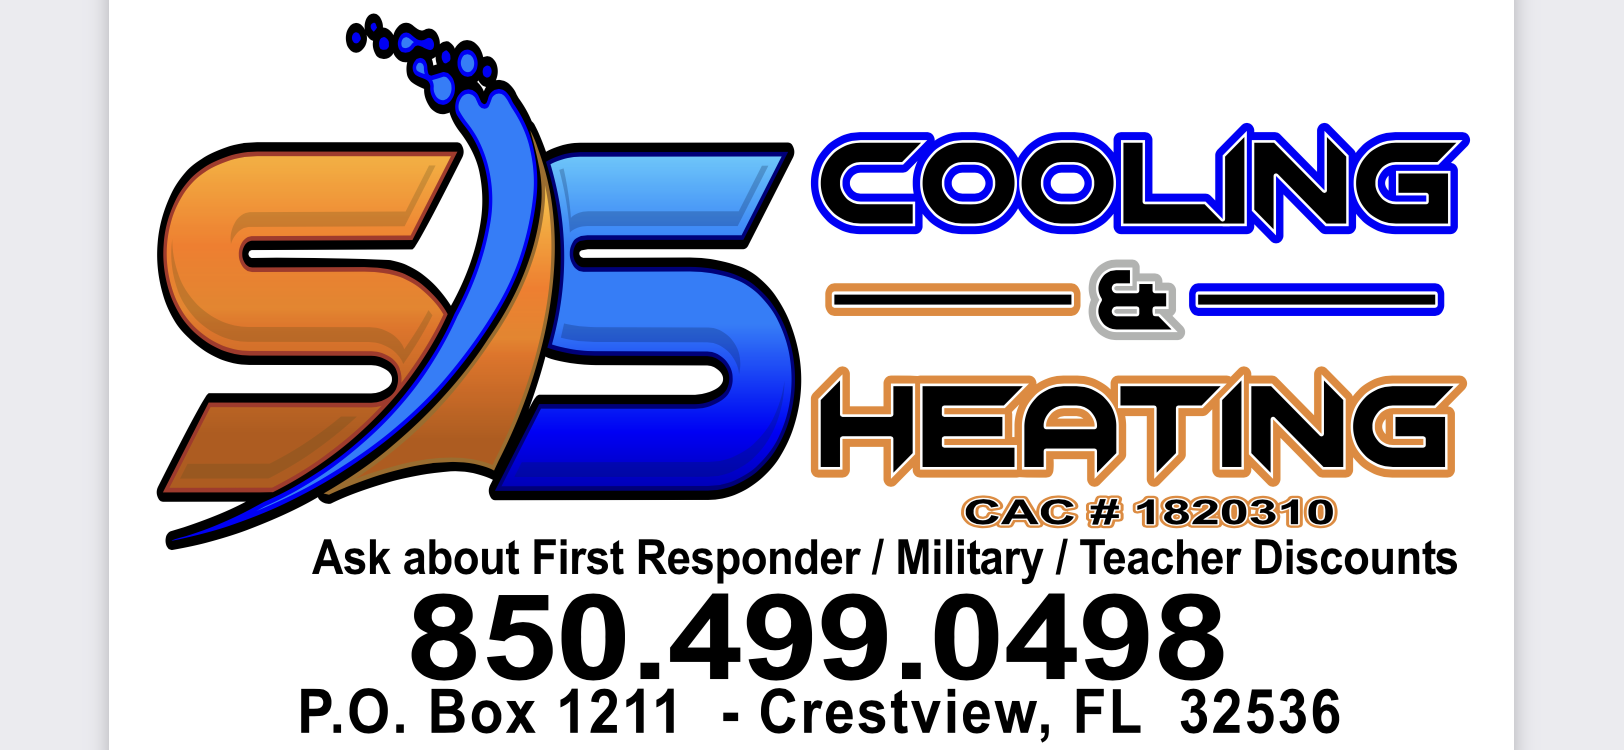 S&S Cooling and Heating LLC Logo